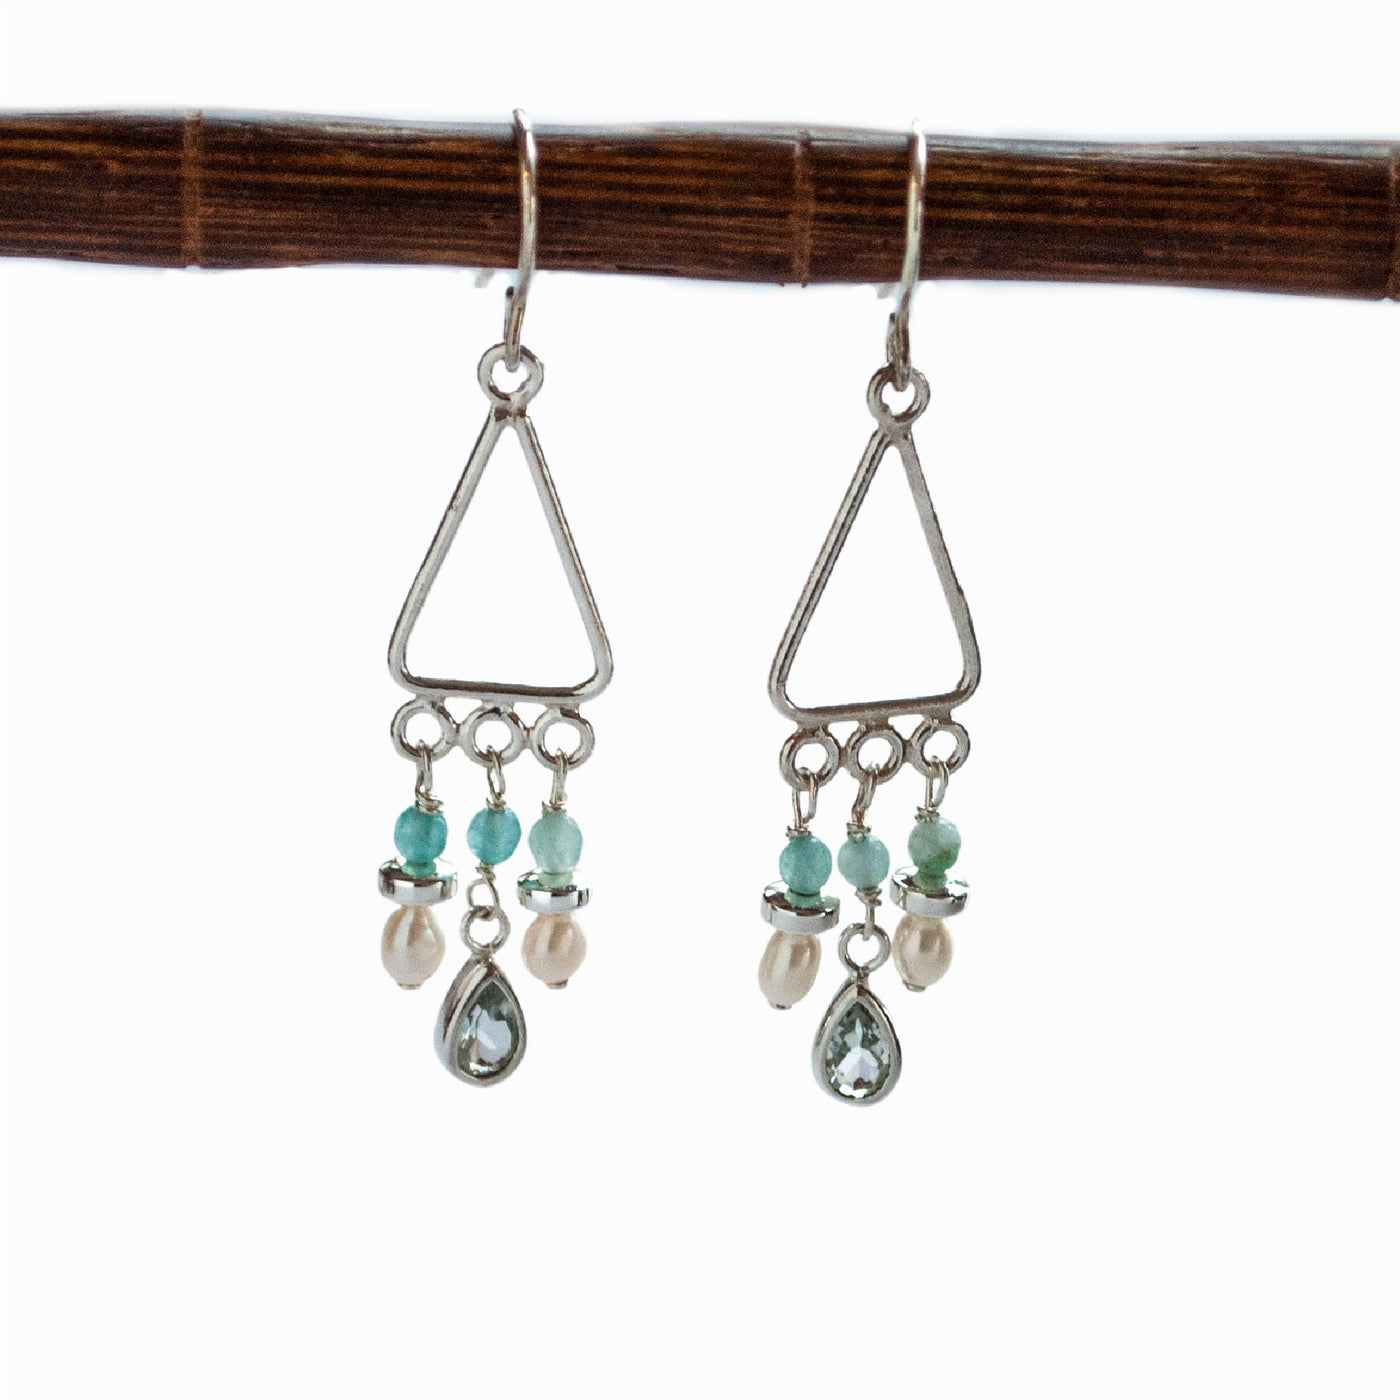 Earrings-Sterling silver chandeliers with drops of aquamarine, fresh water pearl and aqua chalcedony..